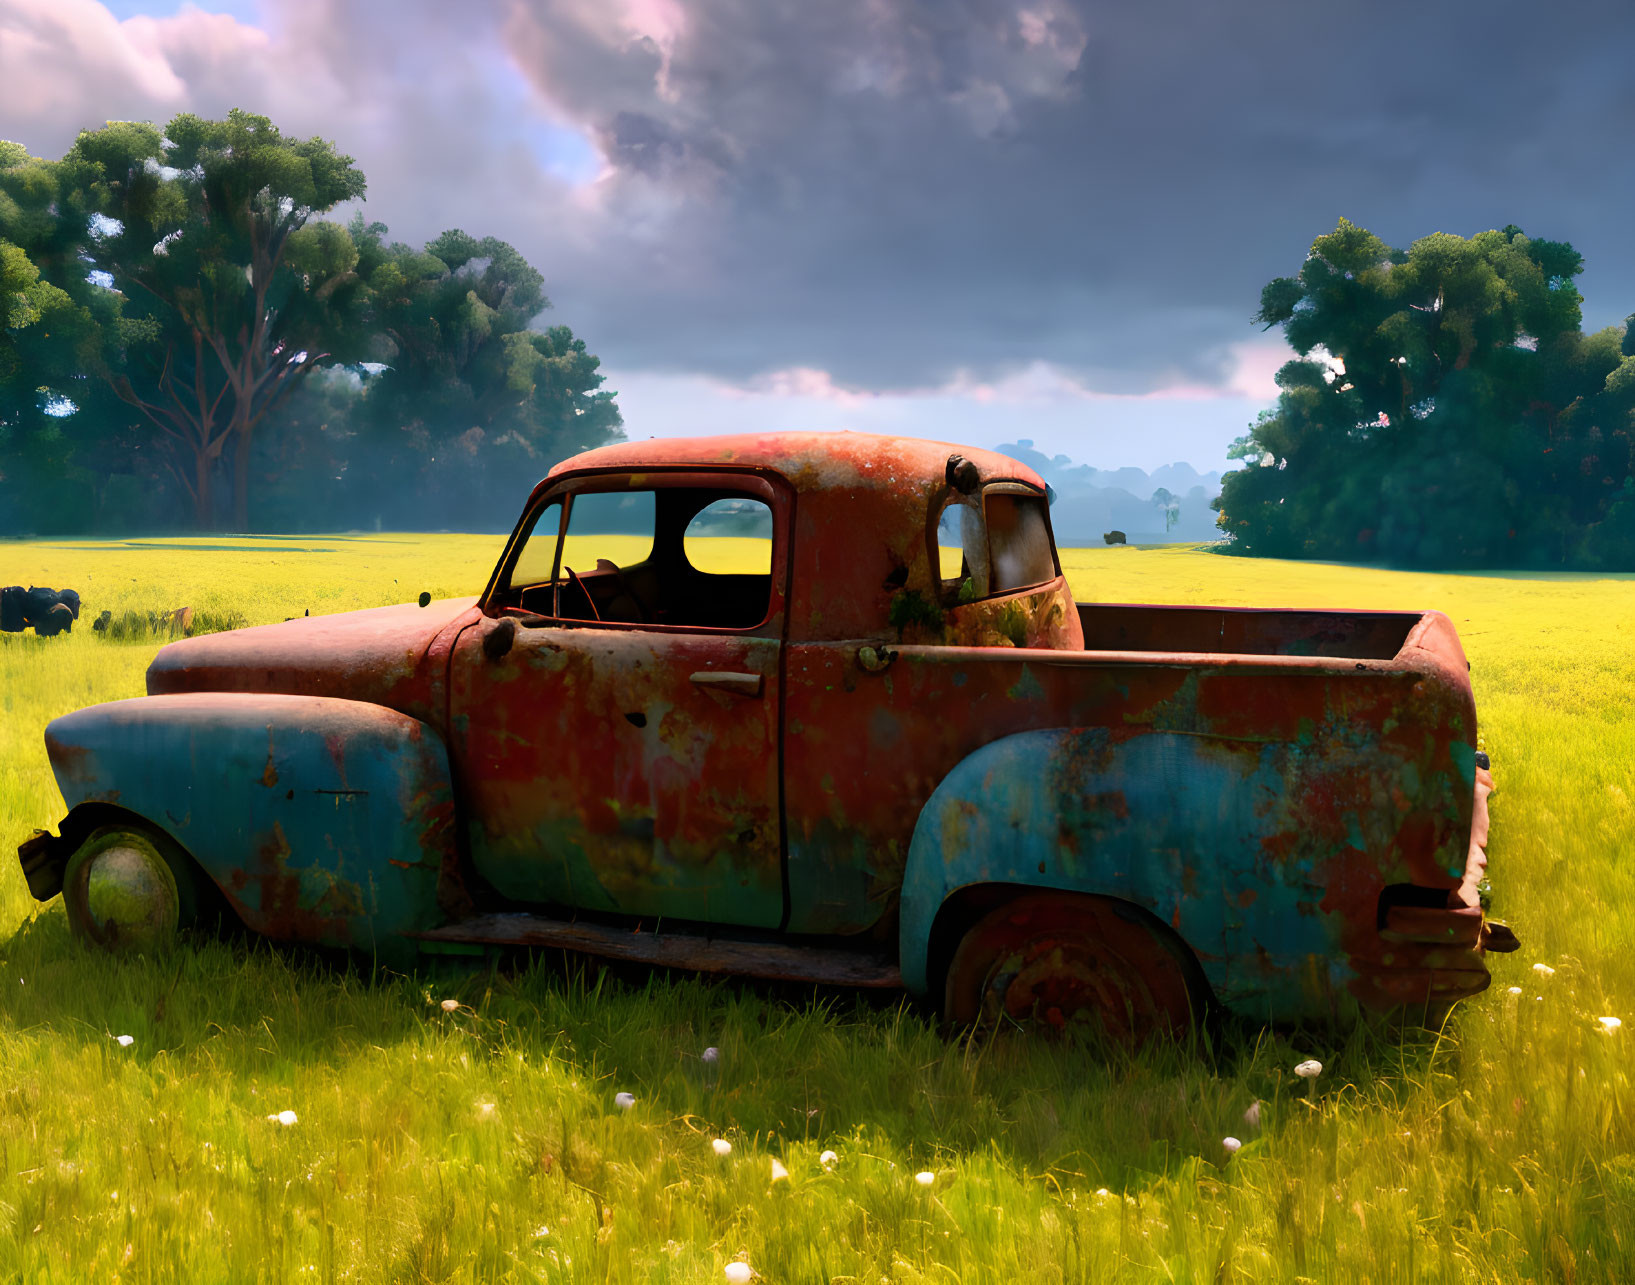 Rusty blue pickup truck in sunny field with tall grass and white flowers